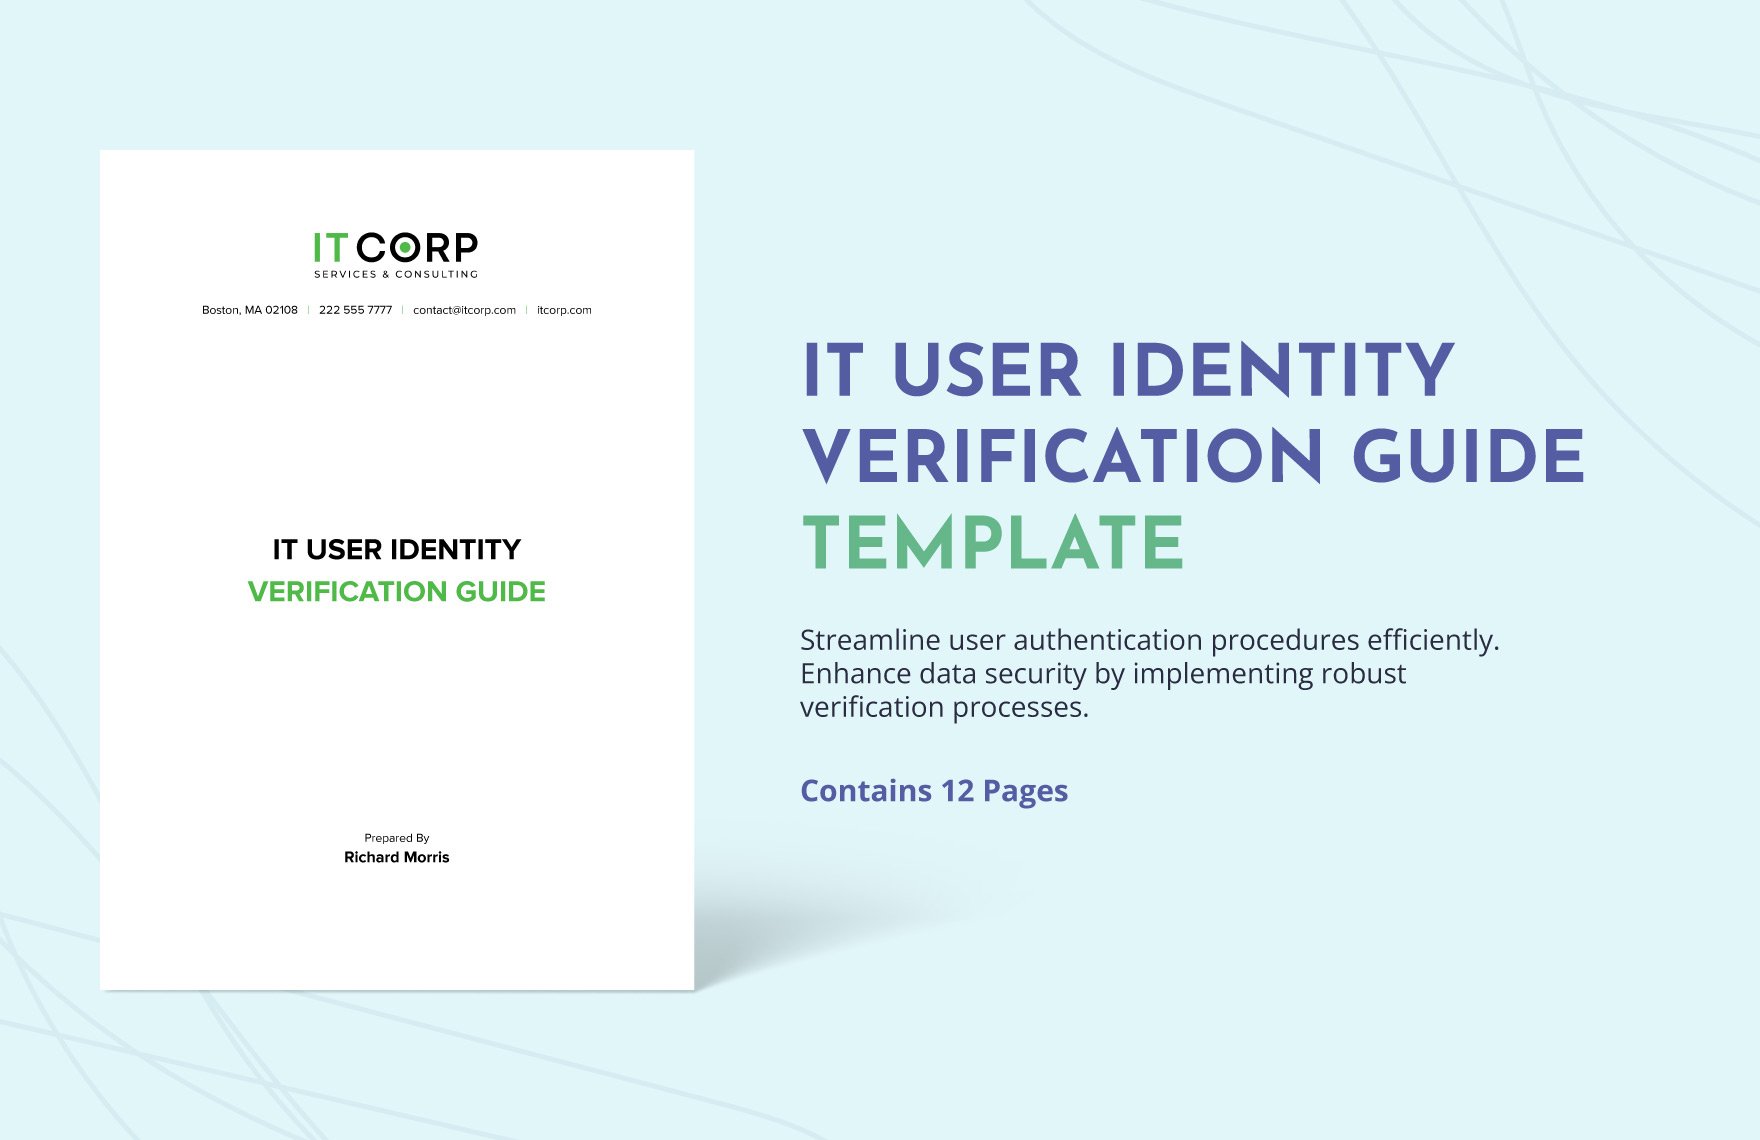 IT User Identity Verification Guide Template